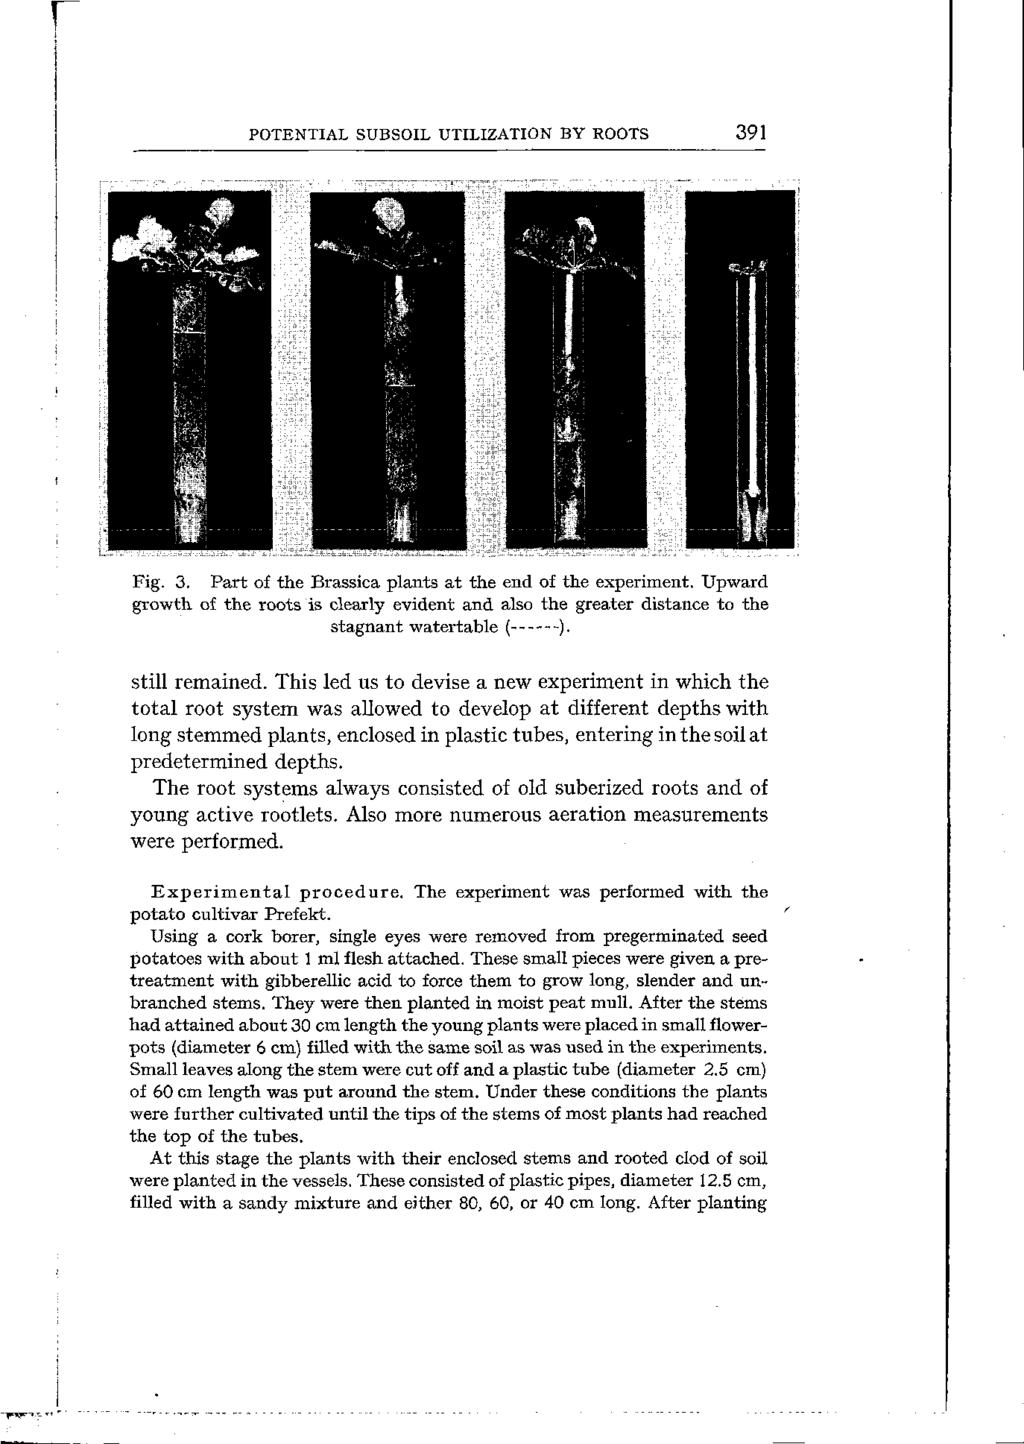 PTENTIAL SUBSIL UTILIZATIN BY RTS 391 Fig. 3. Prt of the Brssic plnts t the endof the experiment. Upwrd growth of the roots is clerly evident nd lso the greter distnce to the stgnnt wtertble ( ).